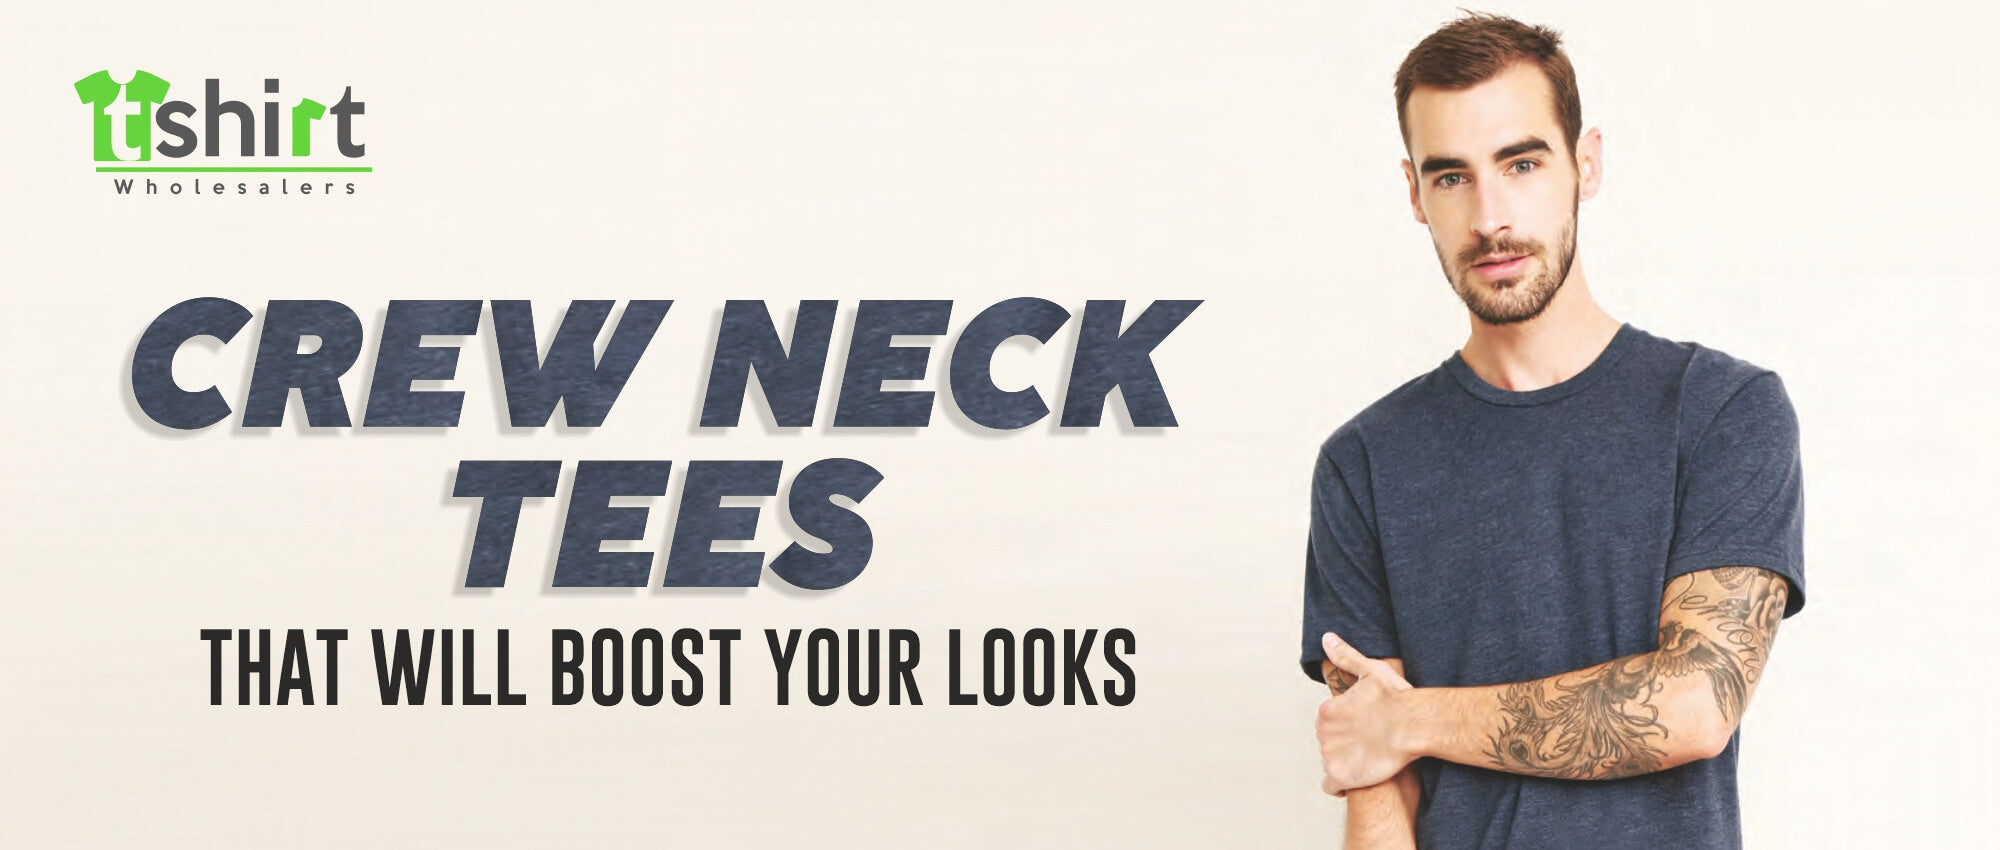 CREW NECK TEES THAT WILL BOOST YOUR LOOKS